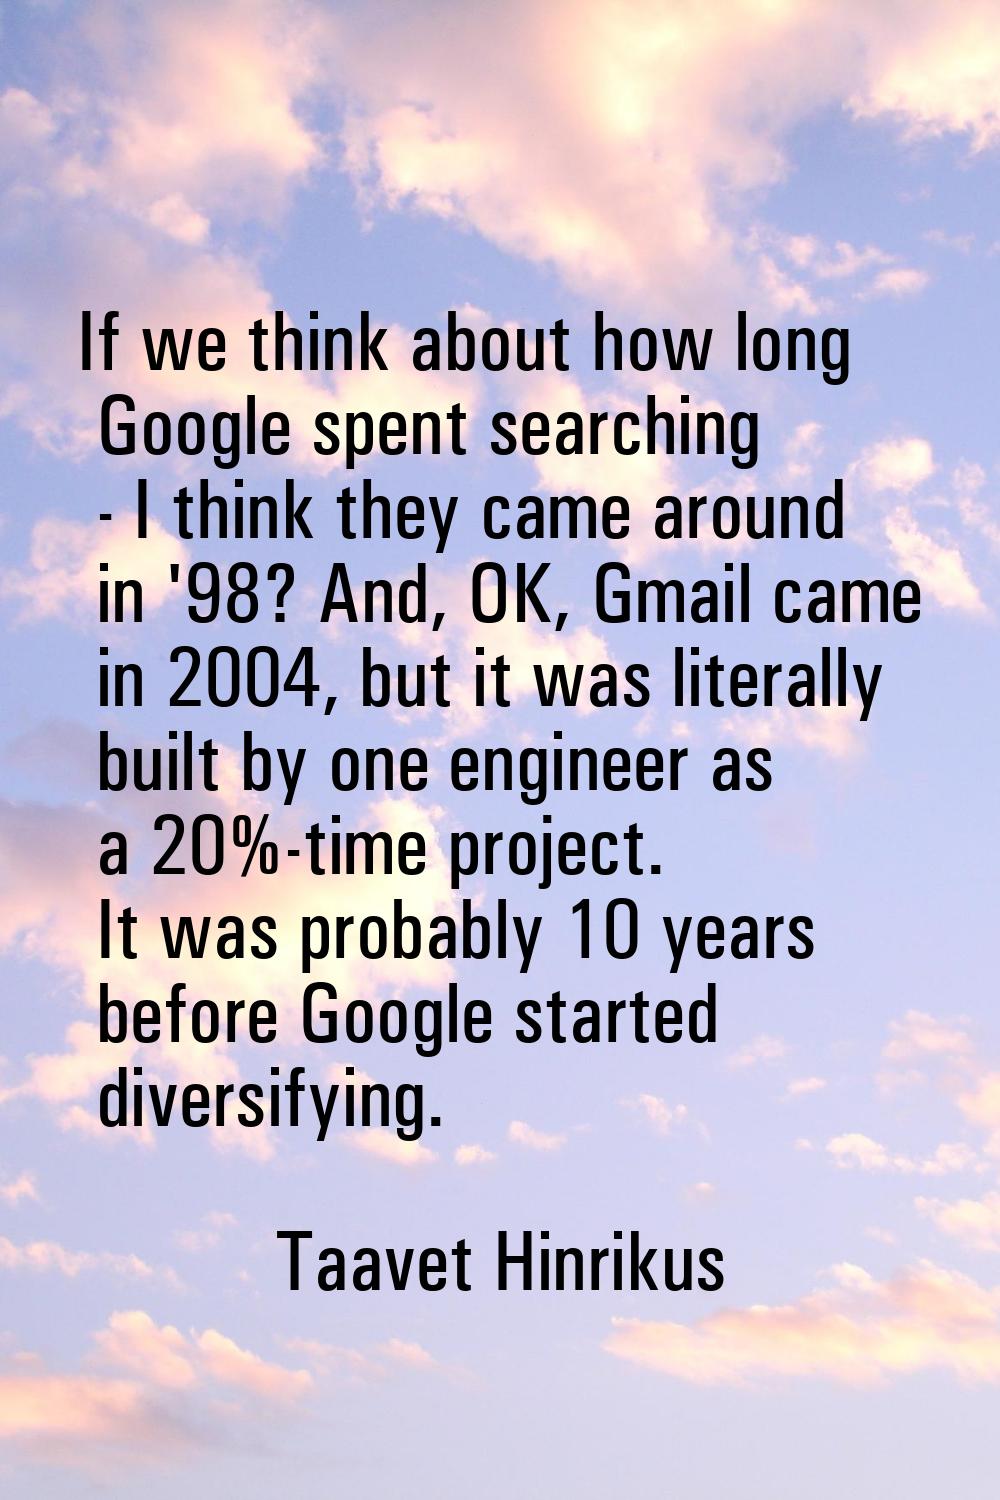 If we think about how long Google spent searching - I think they came around in '98? And, OK, Gmail